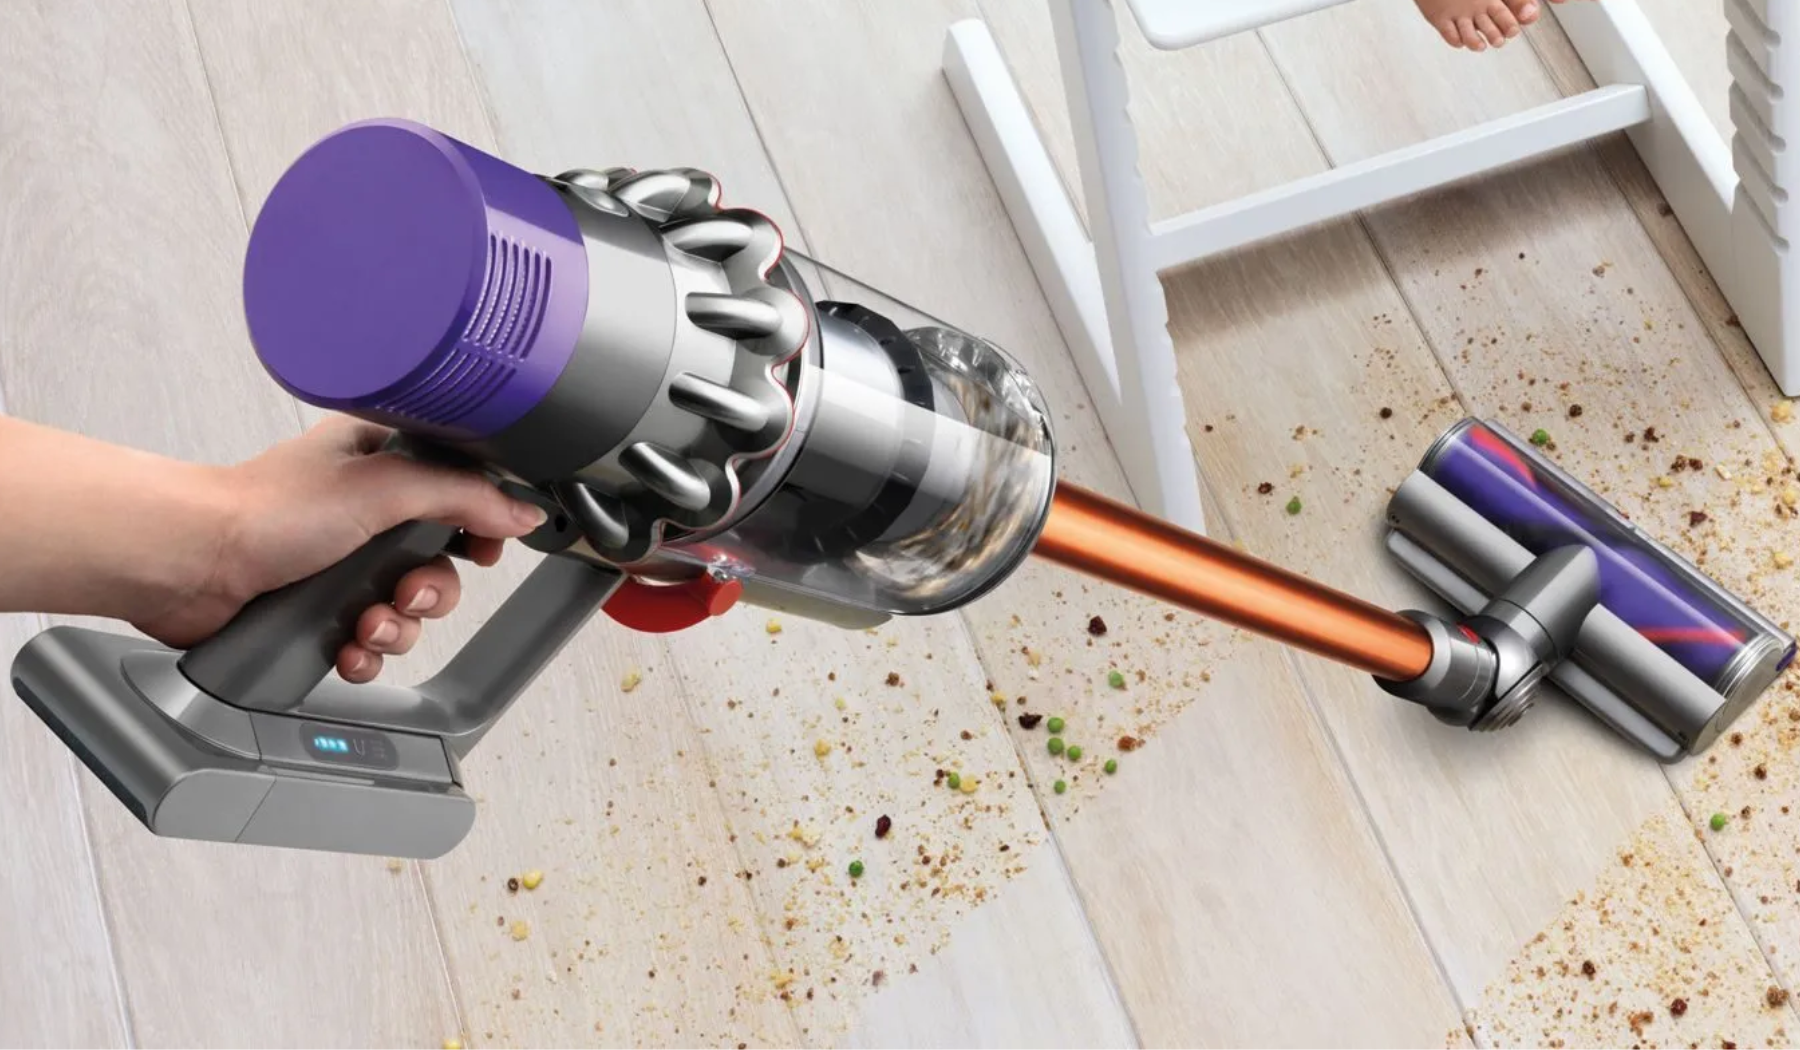 Quite a few cordless Dyson vacuums are $100 off as of Sept. 7